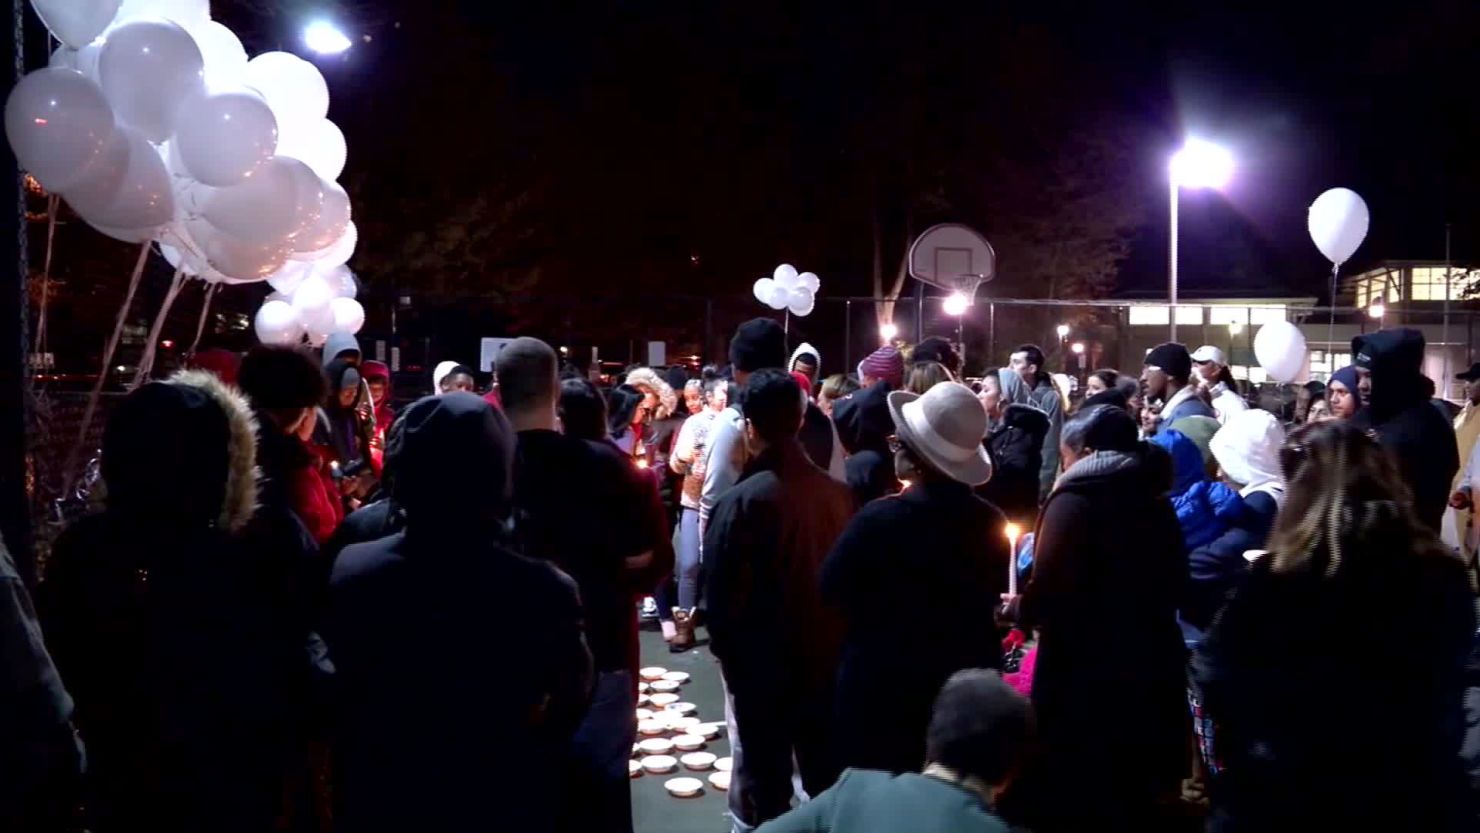 A candlelight vigil was held for Julia E. Crabbe, who suffered an apparent overdose. 